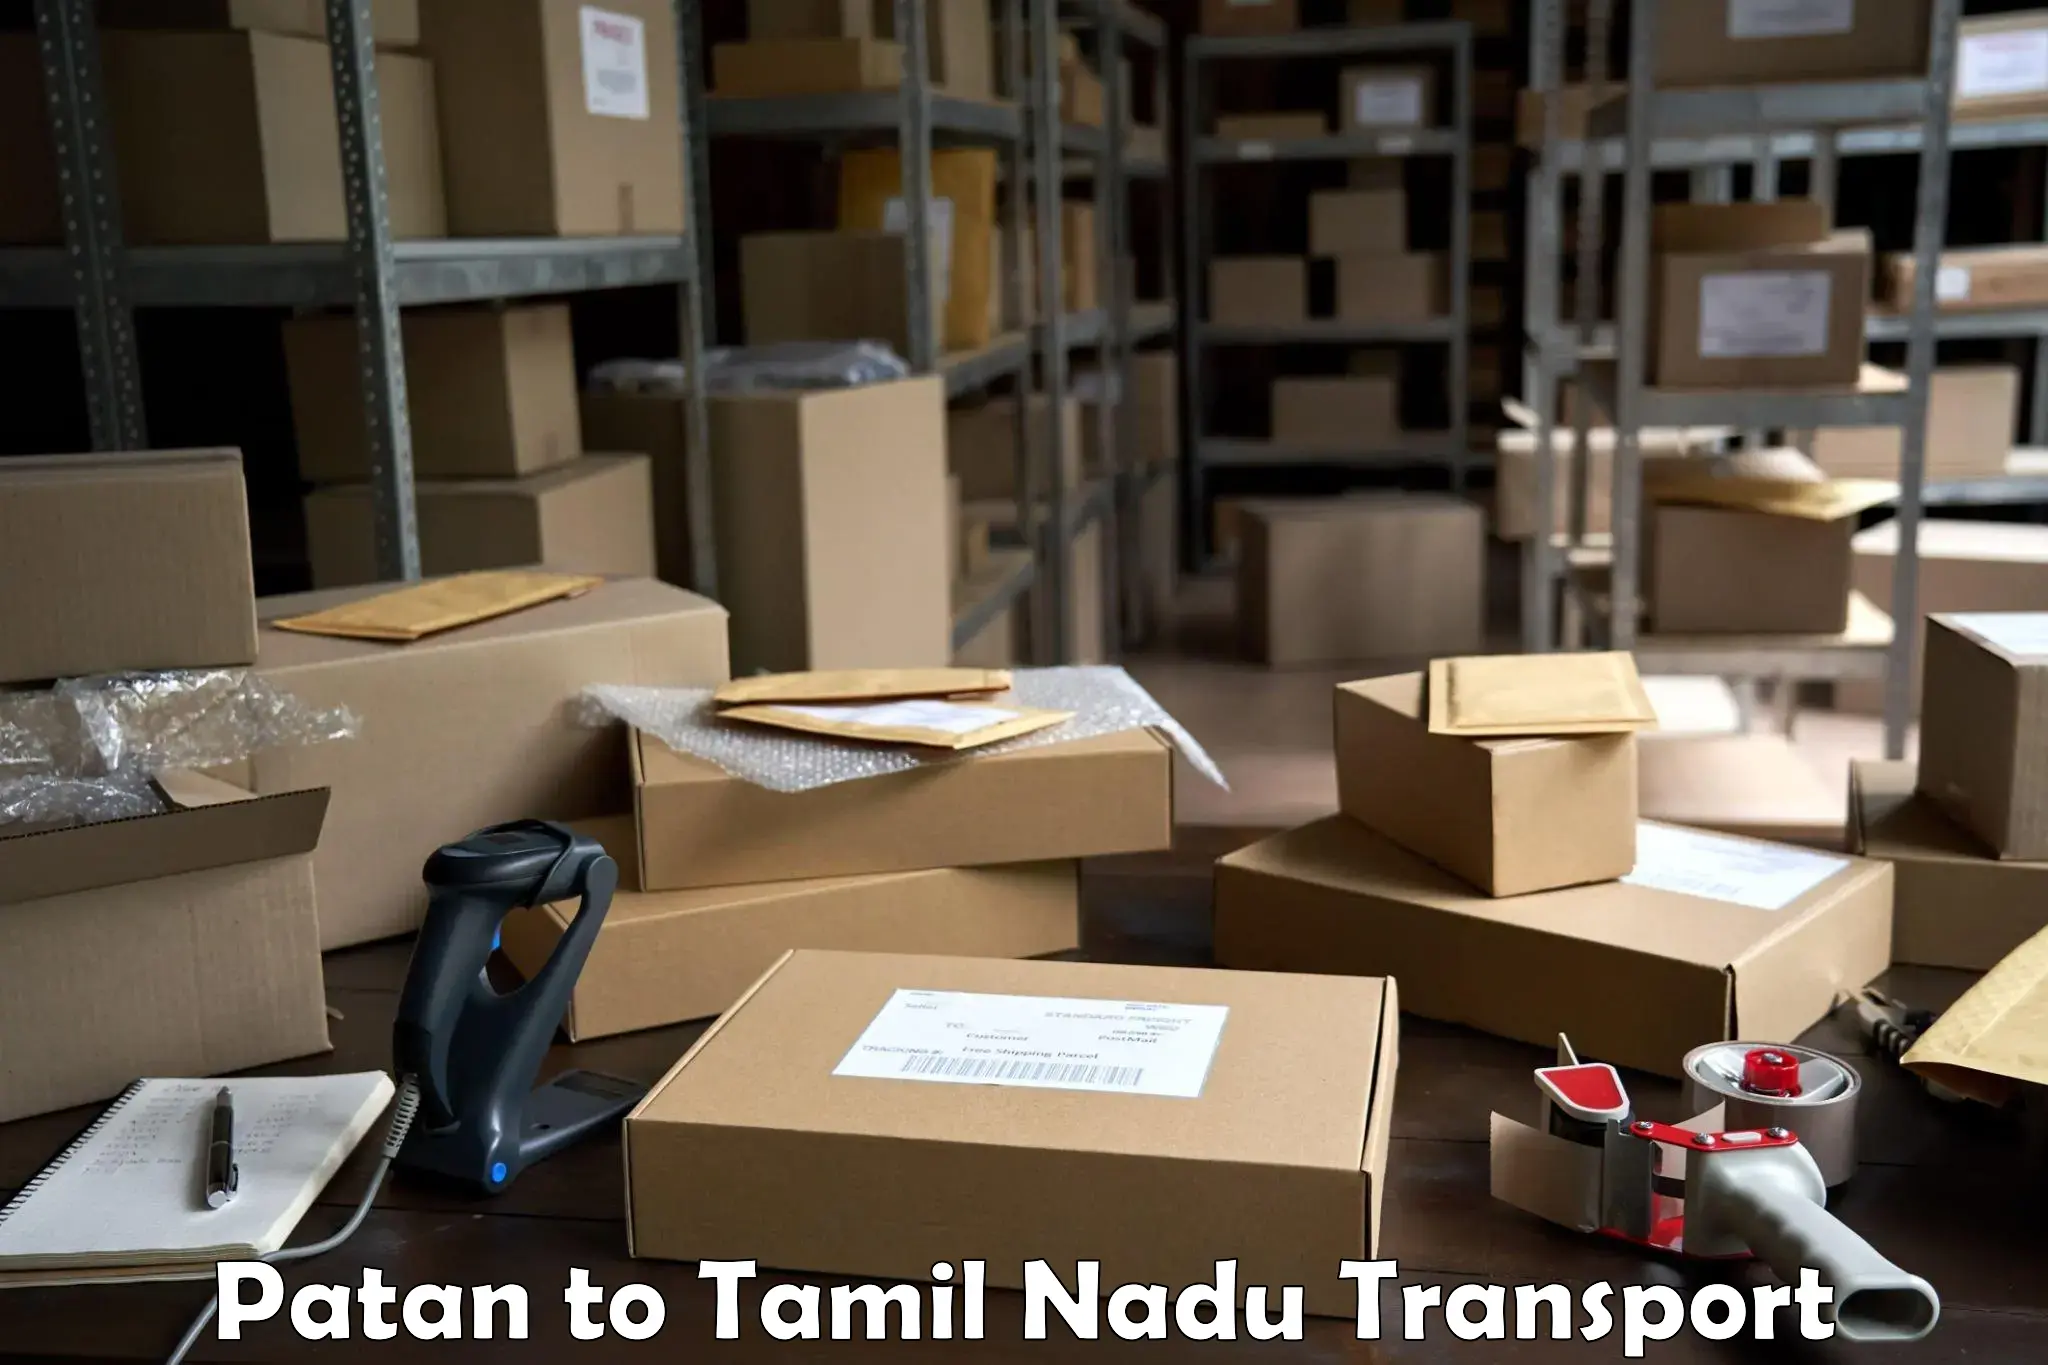 Domestic transport services Patan to Vellore Institute of Technology